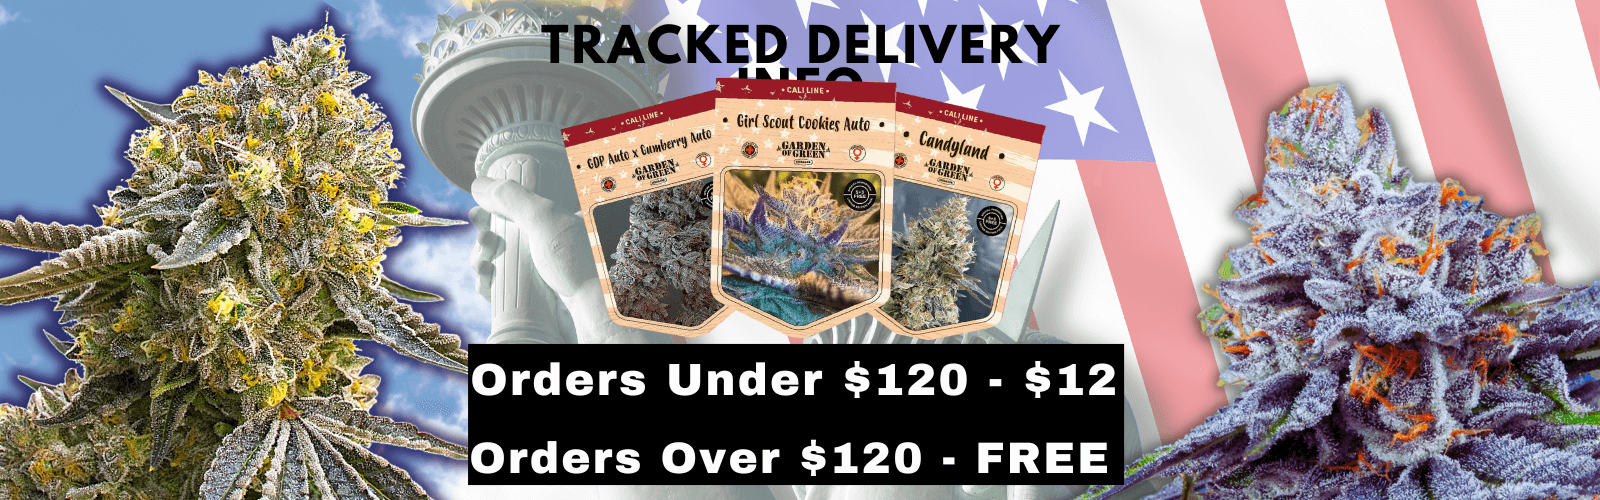 TRACKED DELIVERY INFO gog -